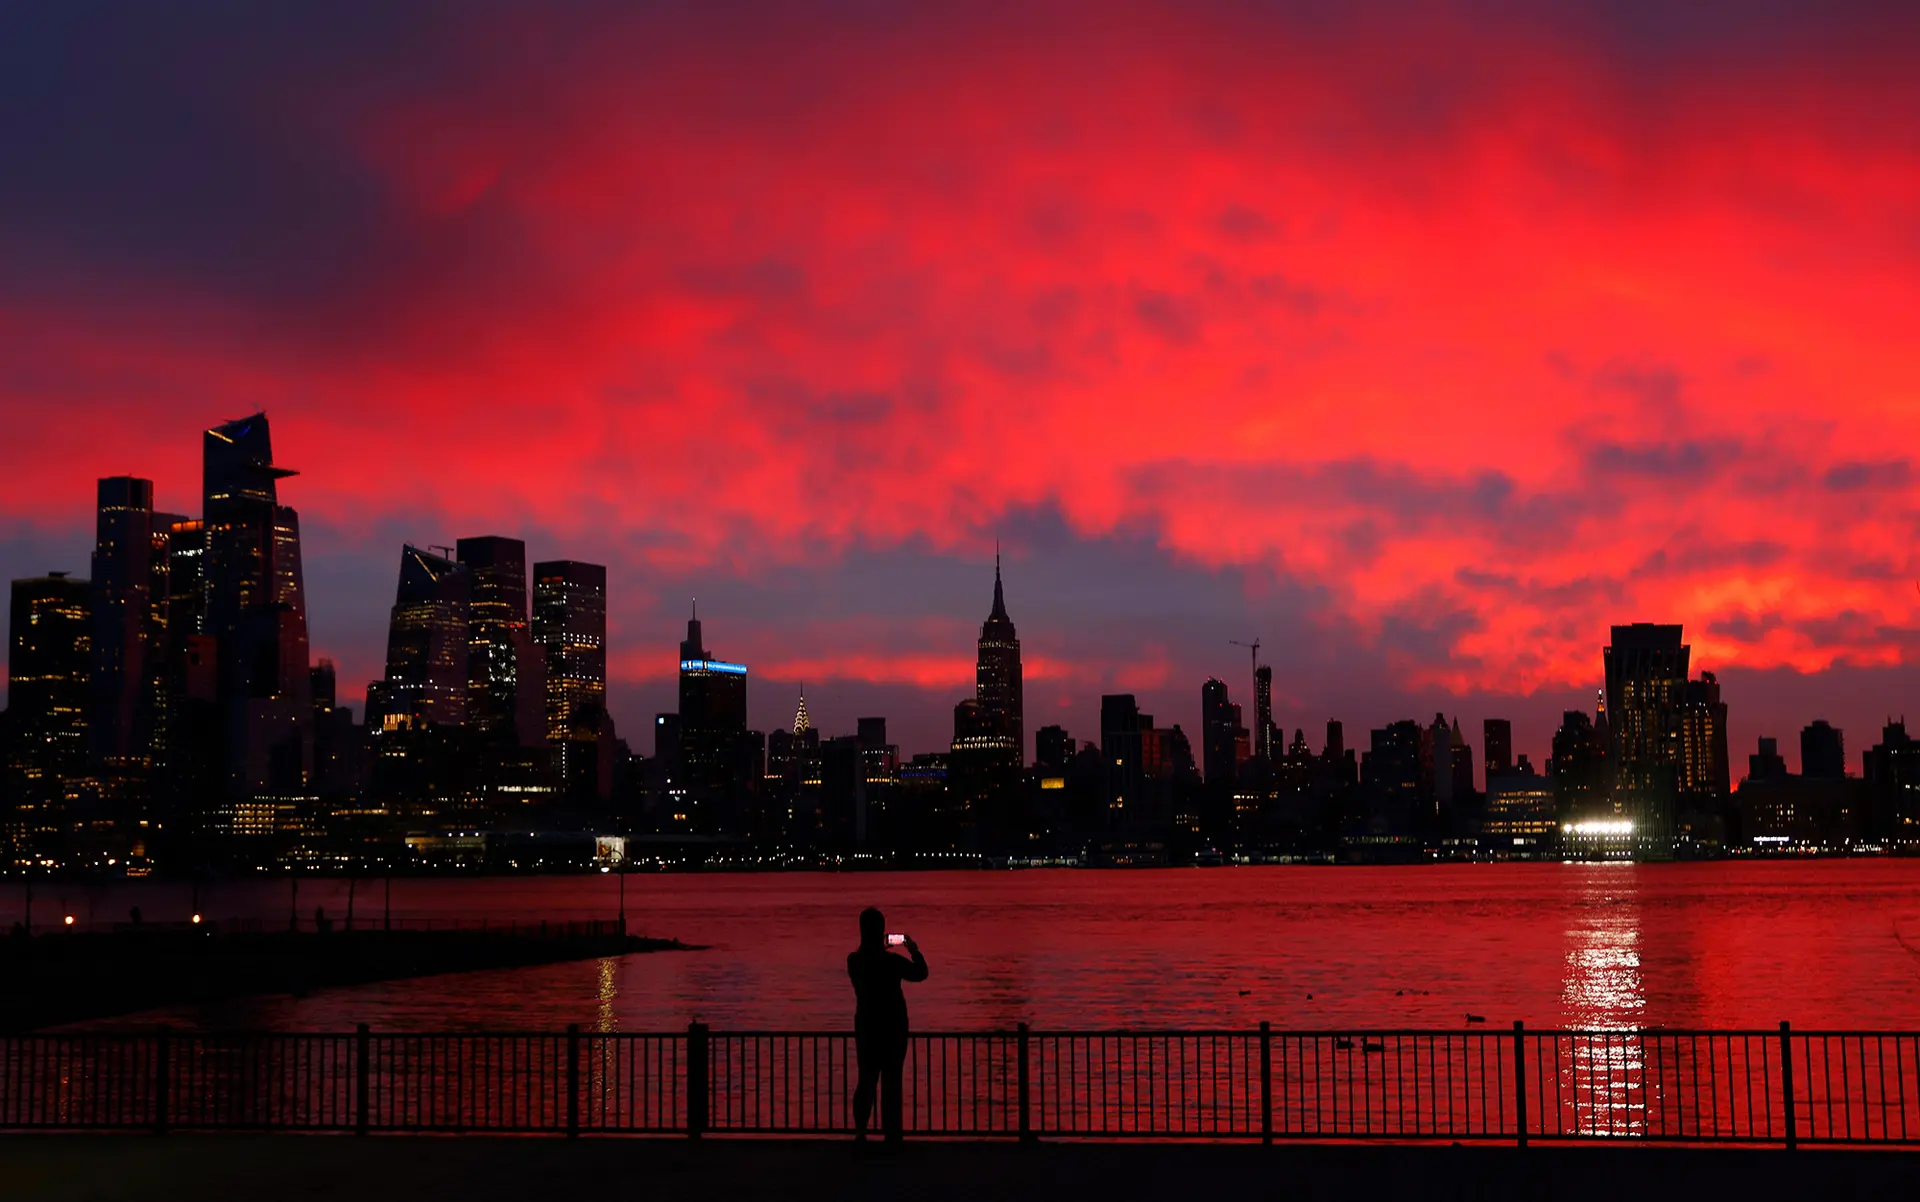 A silhouette of a person taking a photo of a city skyline against a vibrant red sunset reflected in the water.